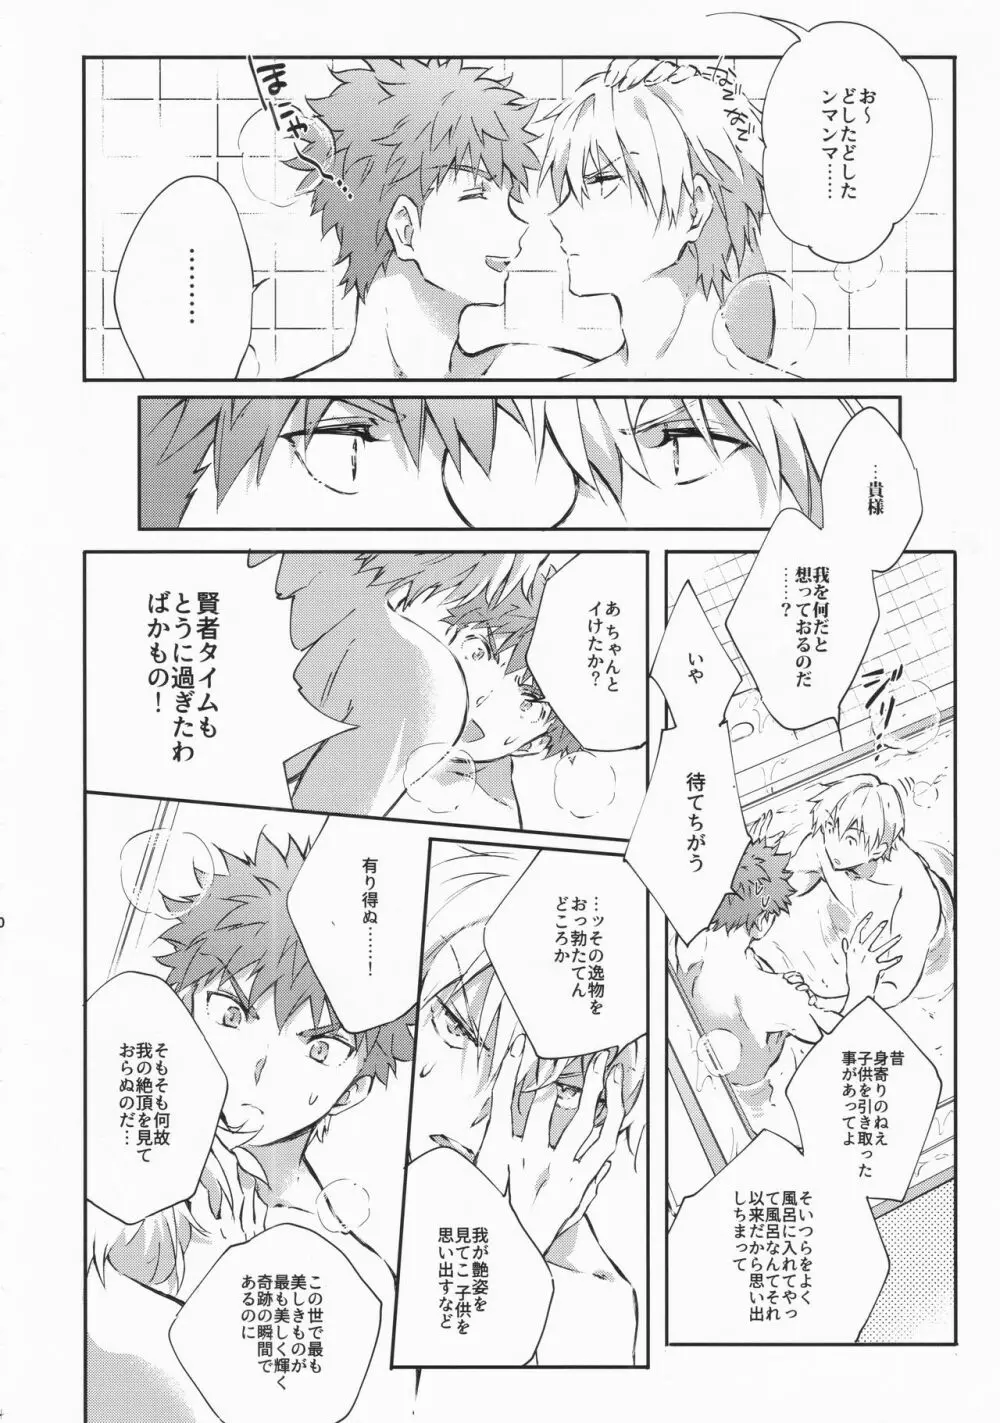 STARDUST LOVESONG encore special story 1st After 7 Days Page.53